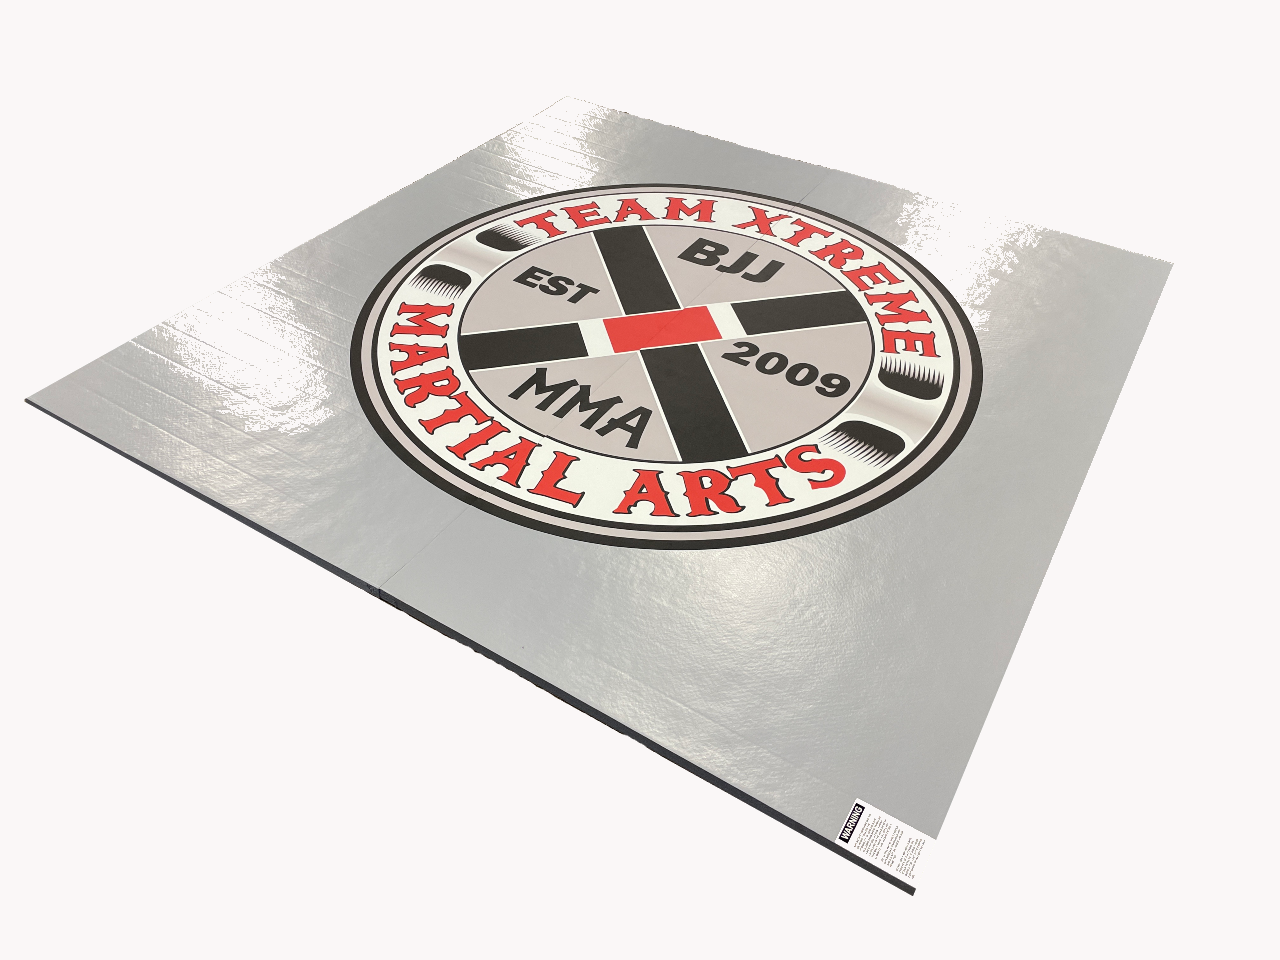 Your Design Digitally Printed 8' x 8' x 1 3/8" Roll-Up Wrestling Mat